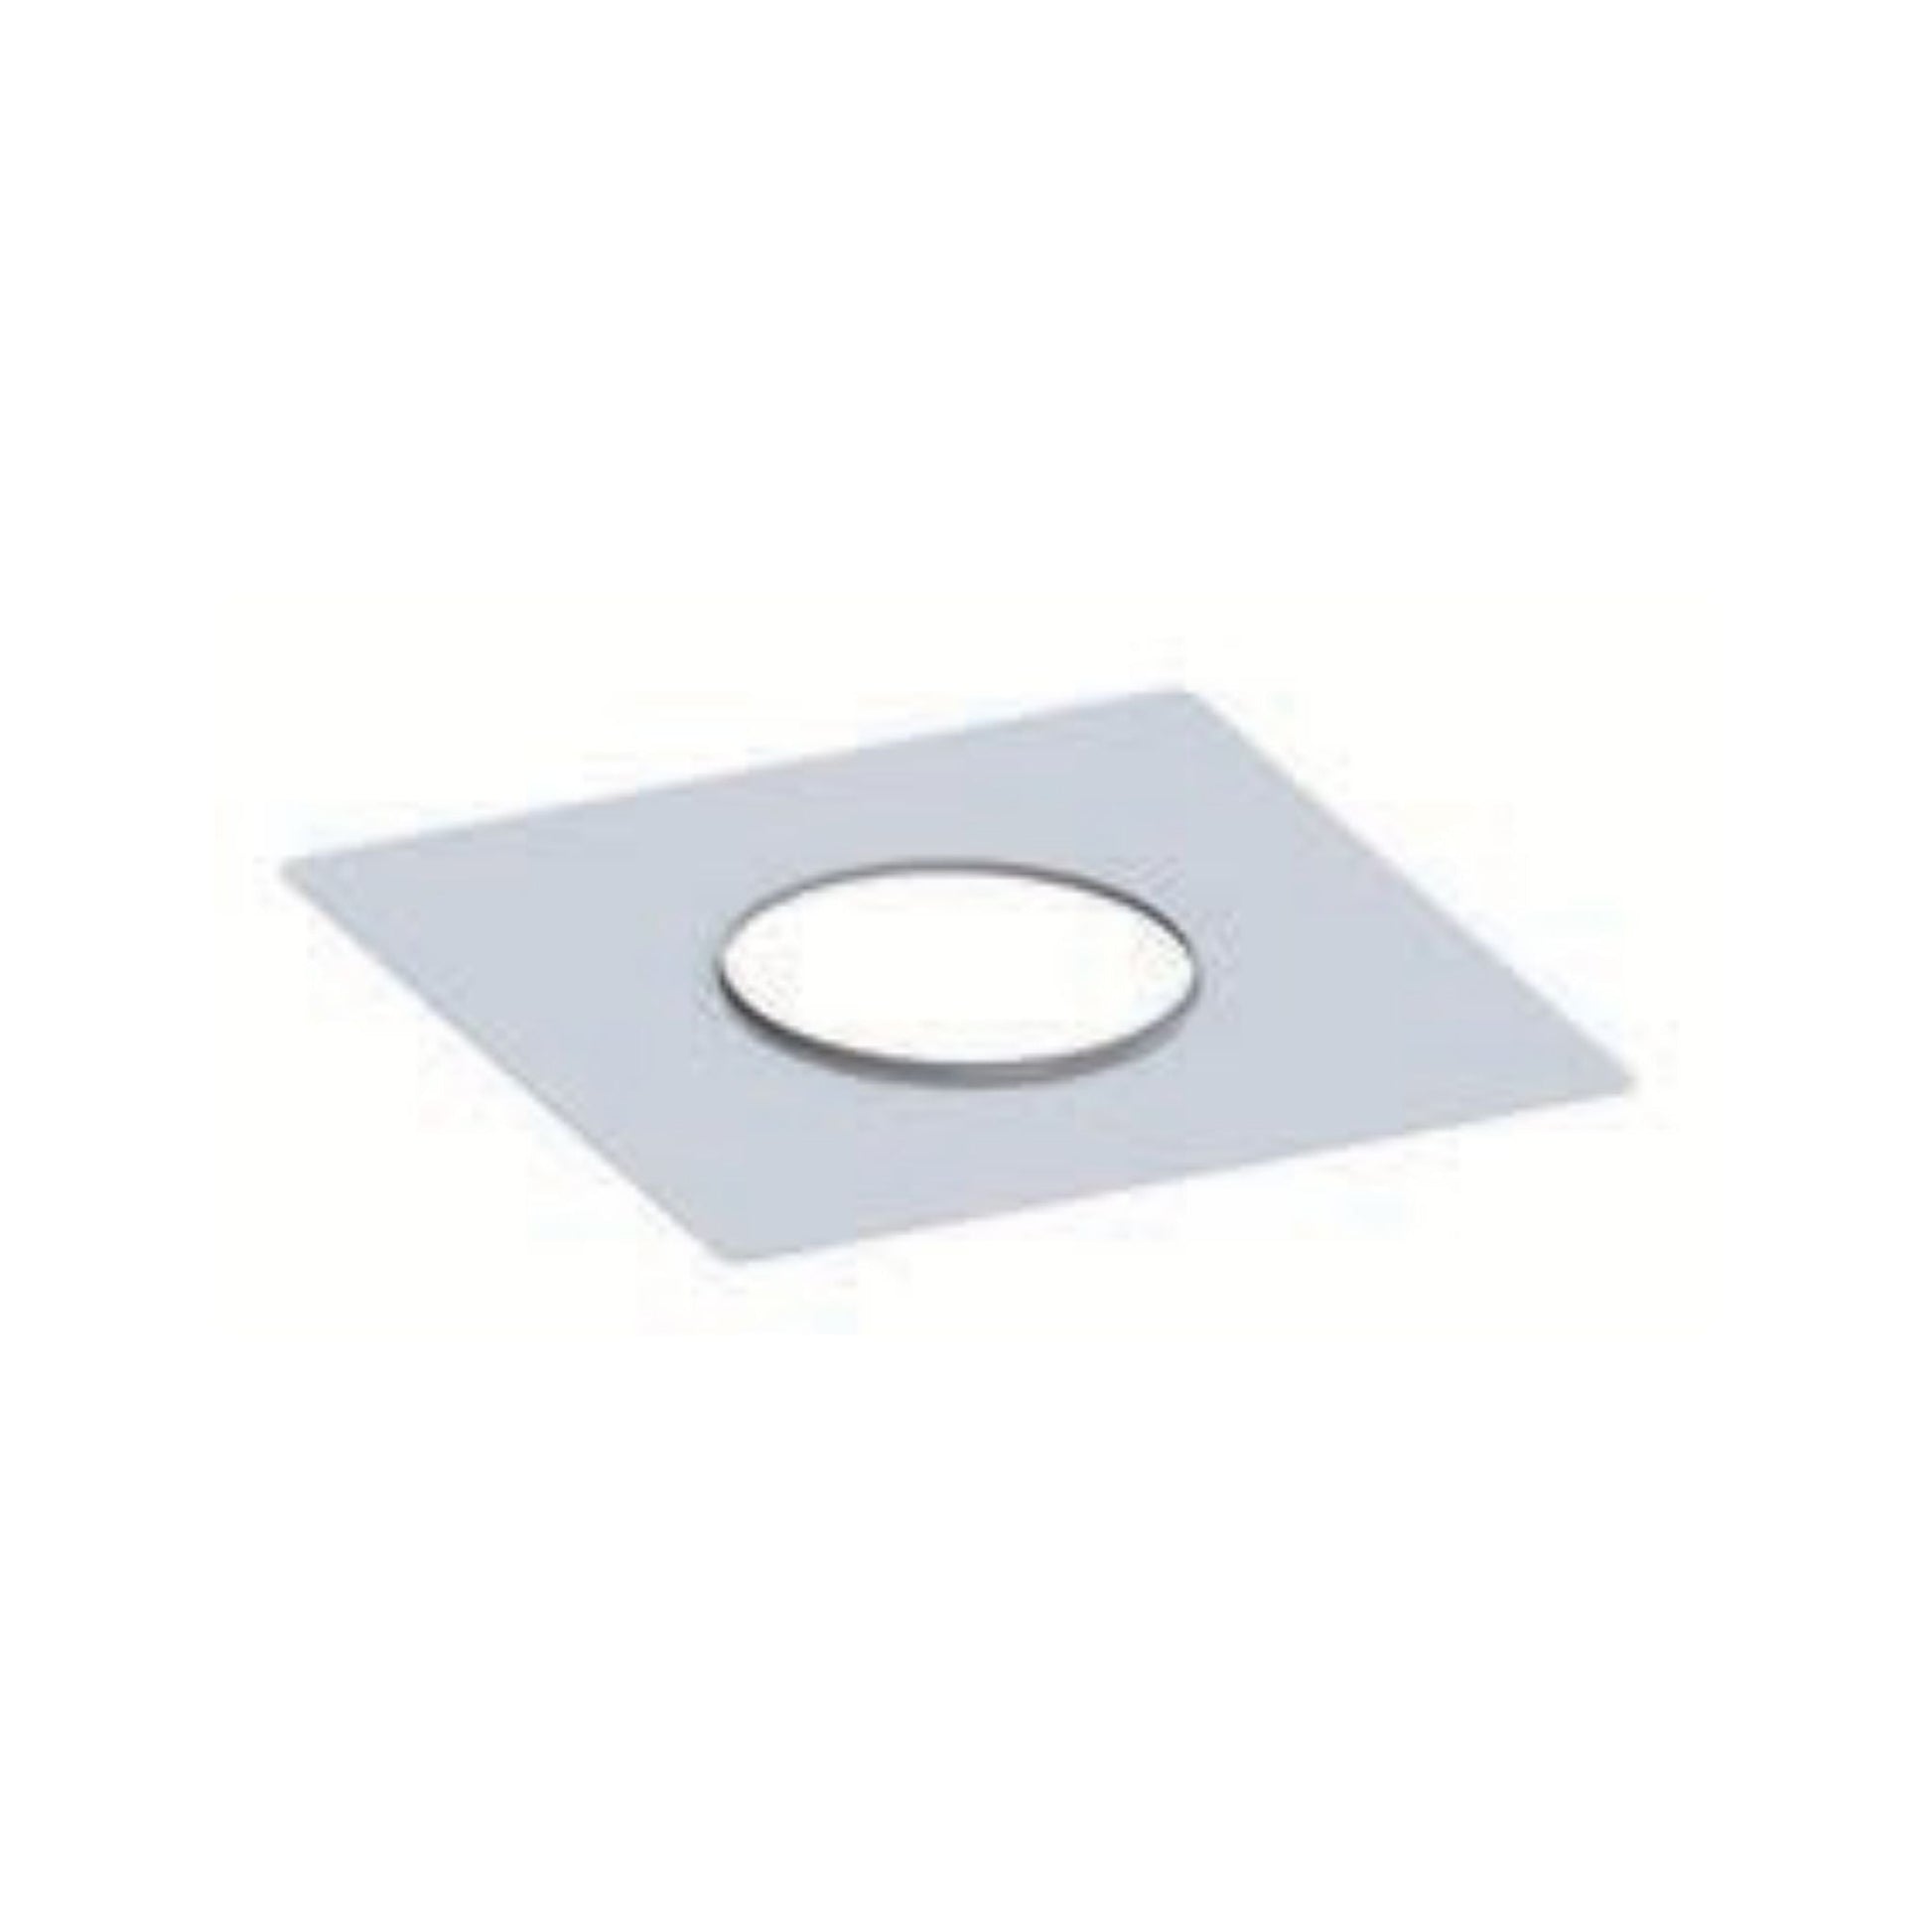 DuraVent FasNSeal Flex 8" Stainless Steel Top Cover Plate